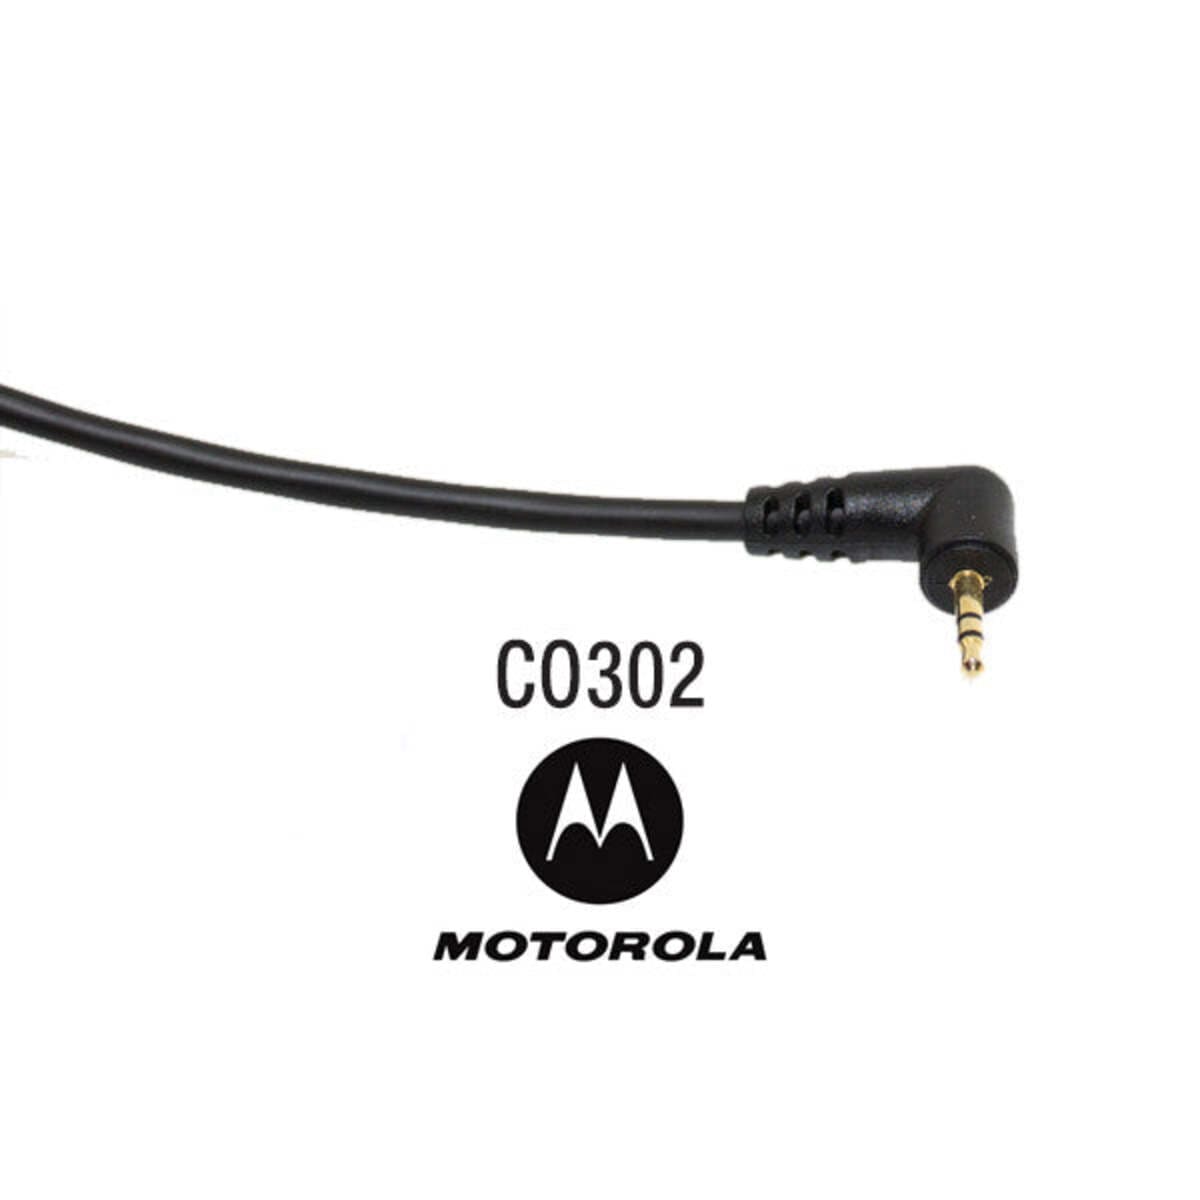 PCI Race Radios Coil Cord Headset Adapter